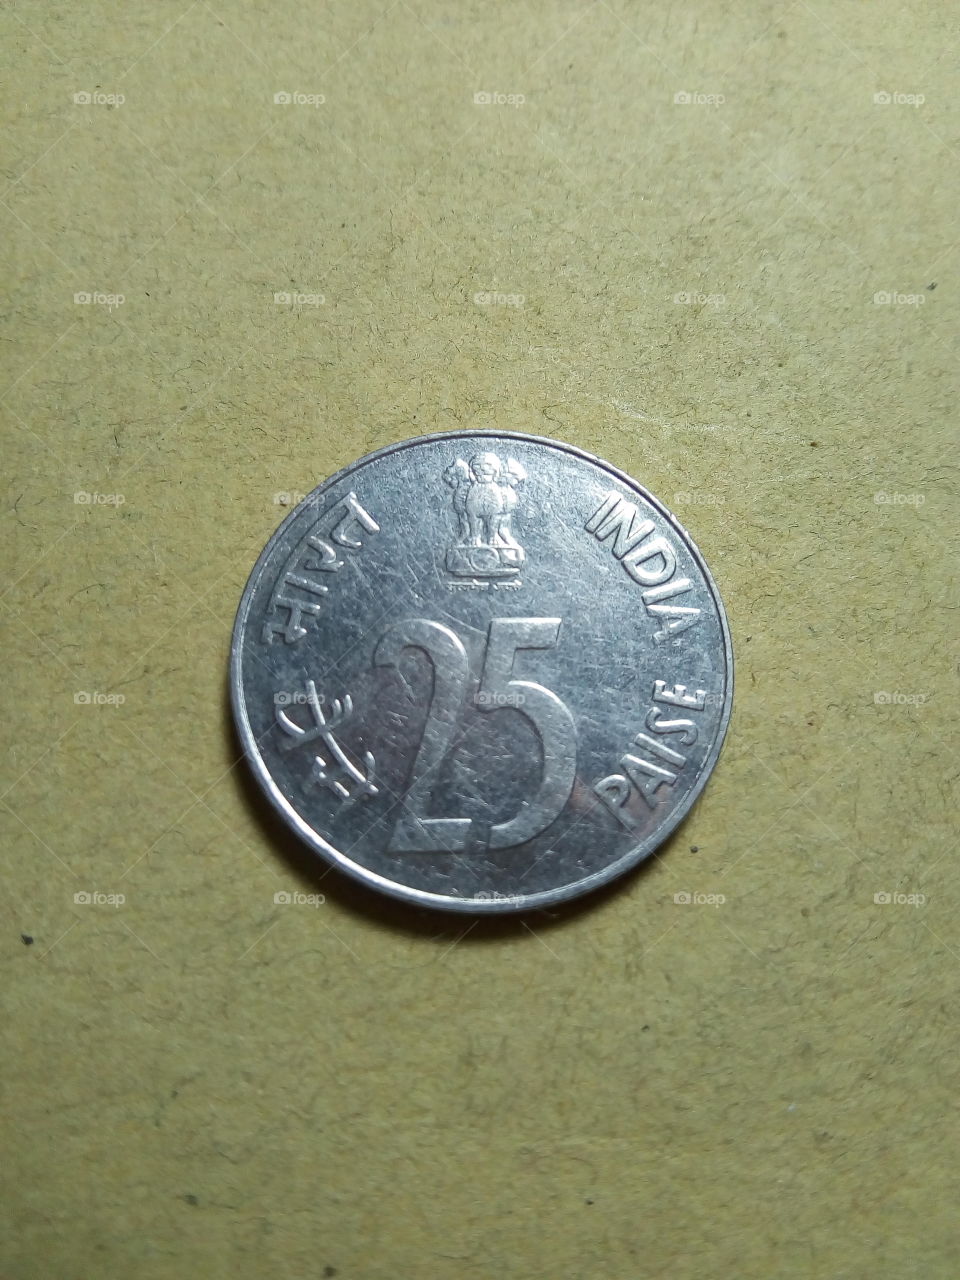 A coin of twenty five paise- 1/4 share of Indian Rupee issued by Government of India in 1988.